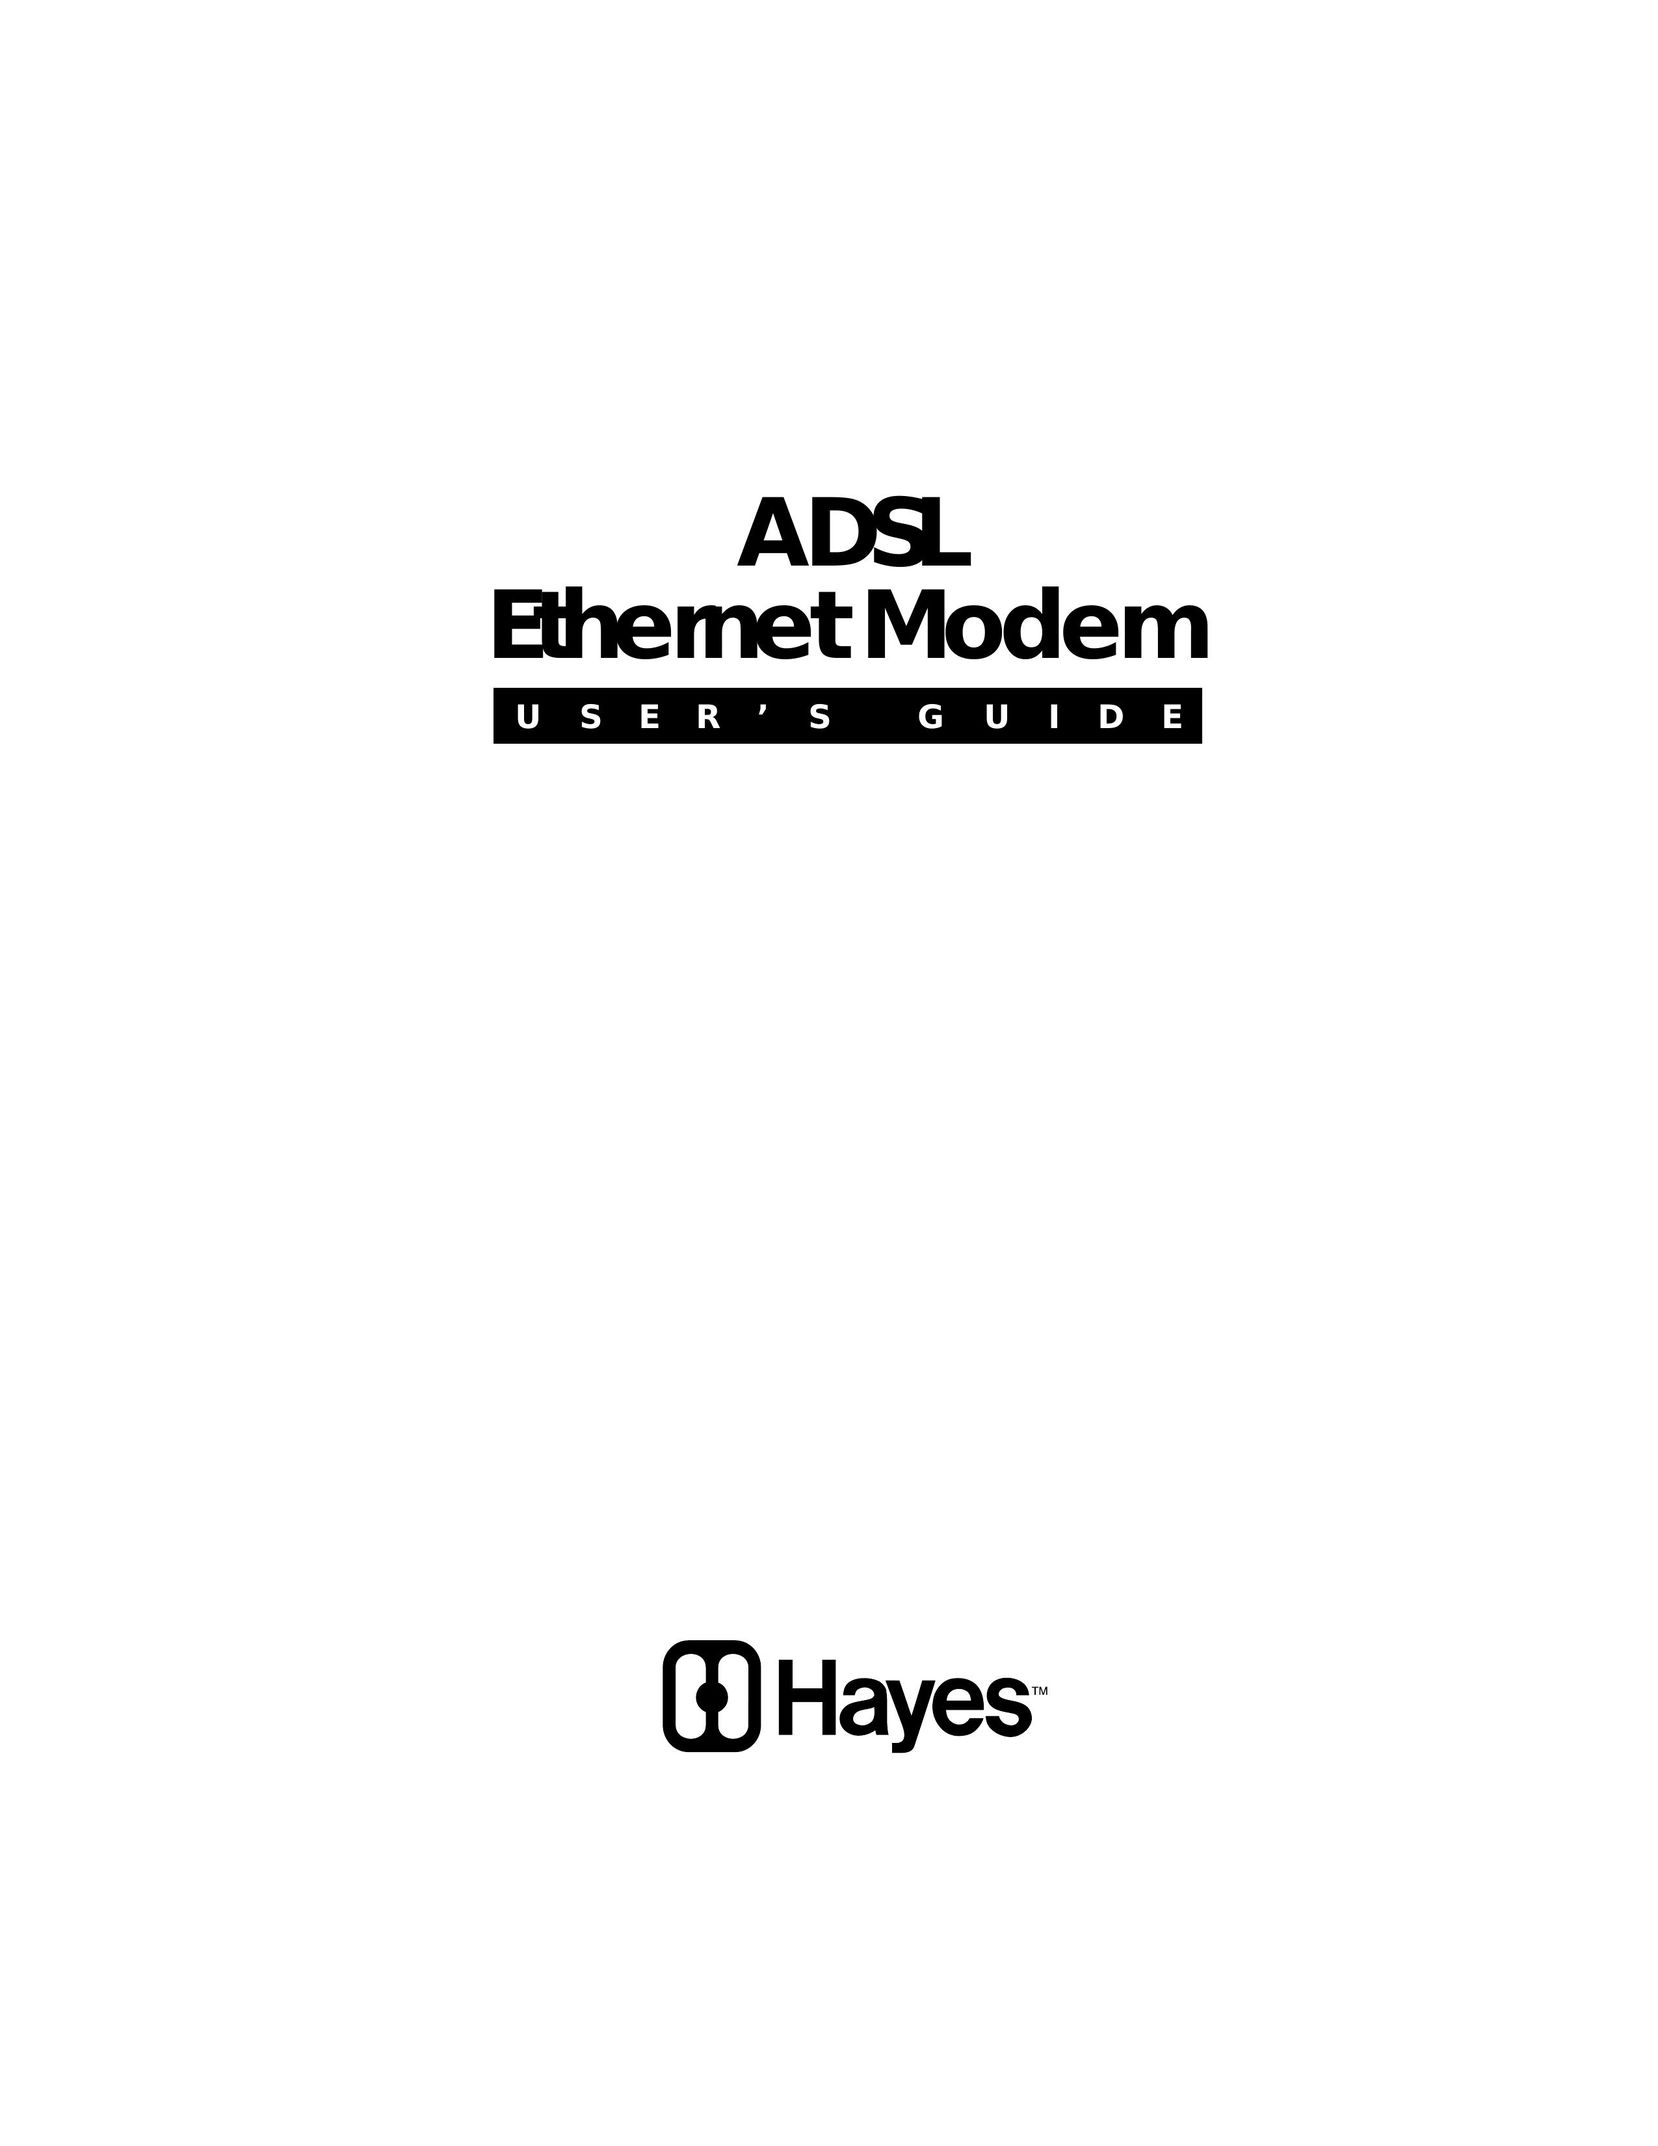 Hayes Microcomputer Products ADSL Ethernet Modem Network Router User Manual